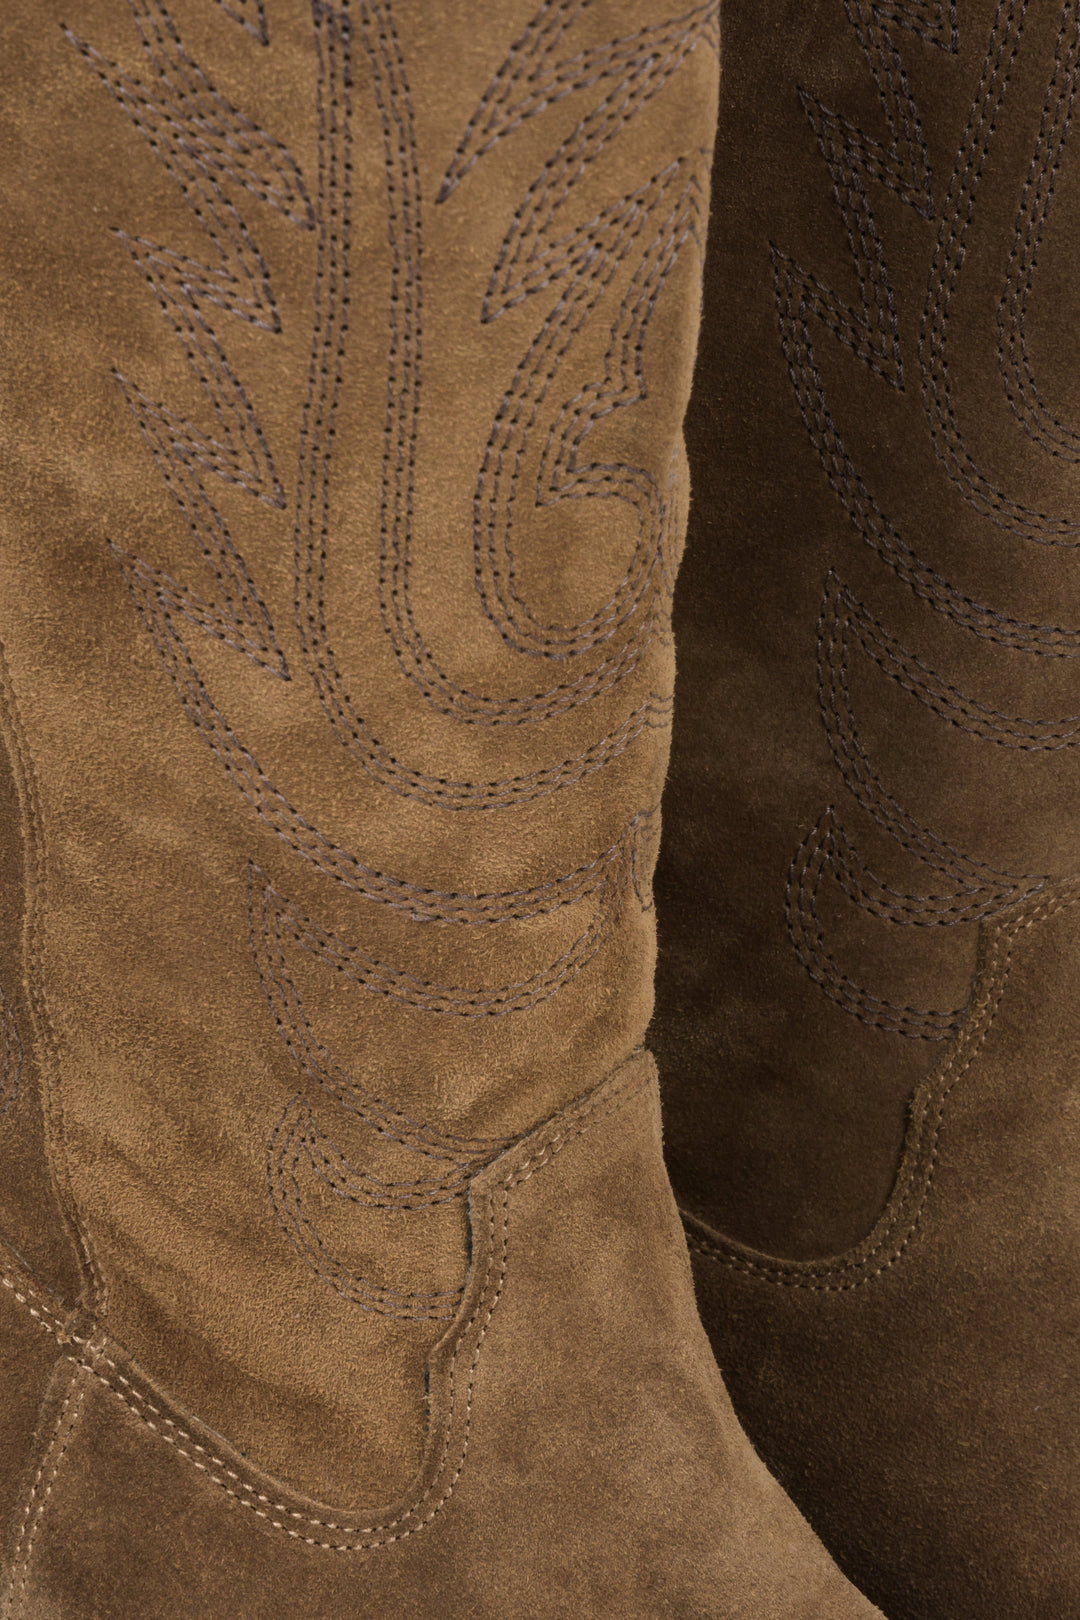 Women's brown cowboy boots with embellishments made of genuine Italian suede - close-up on the details.